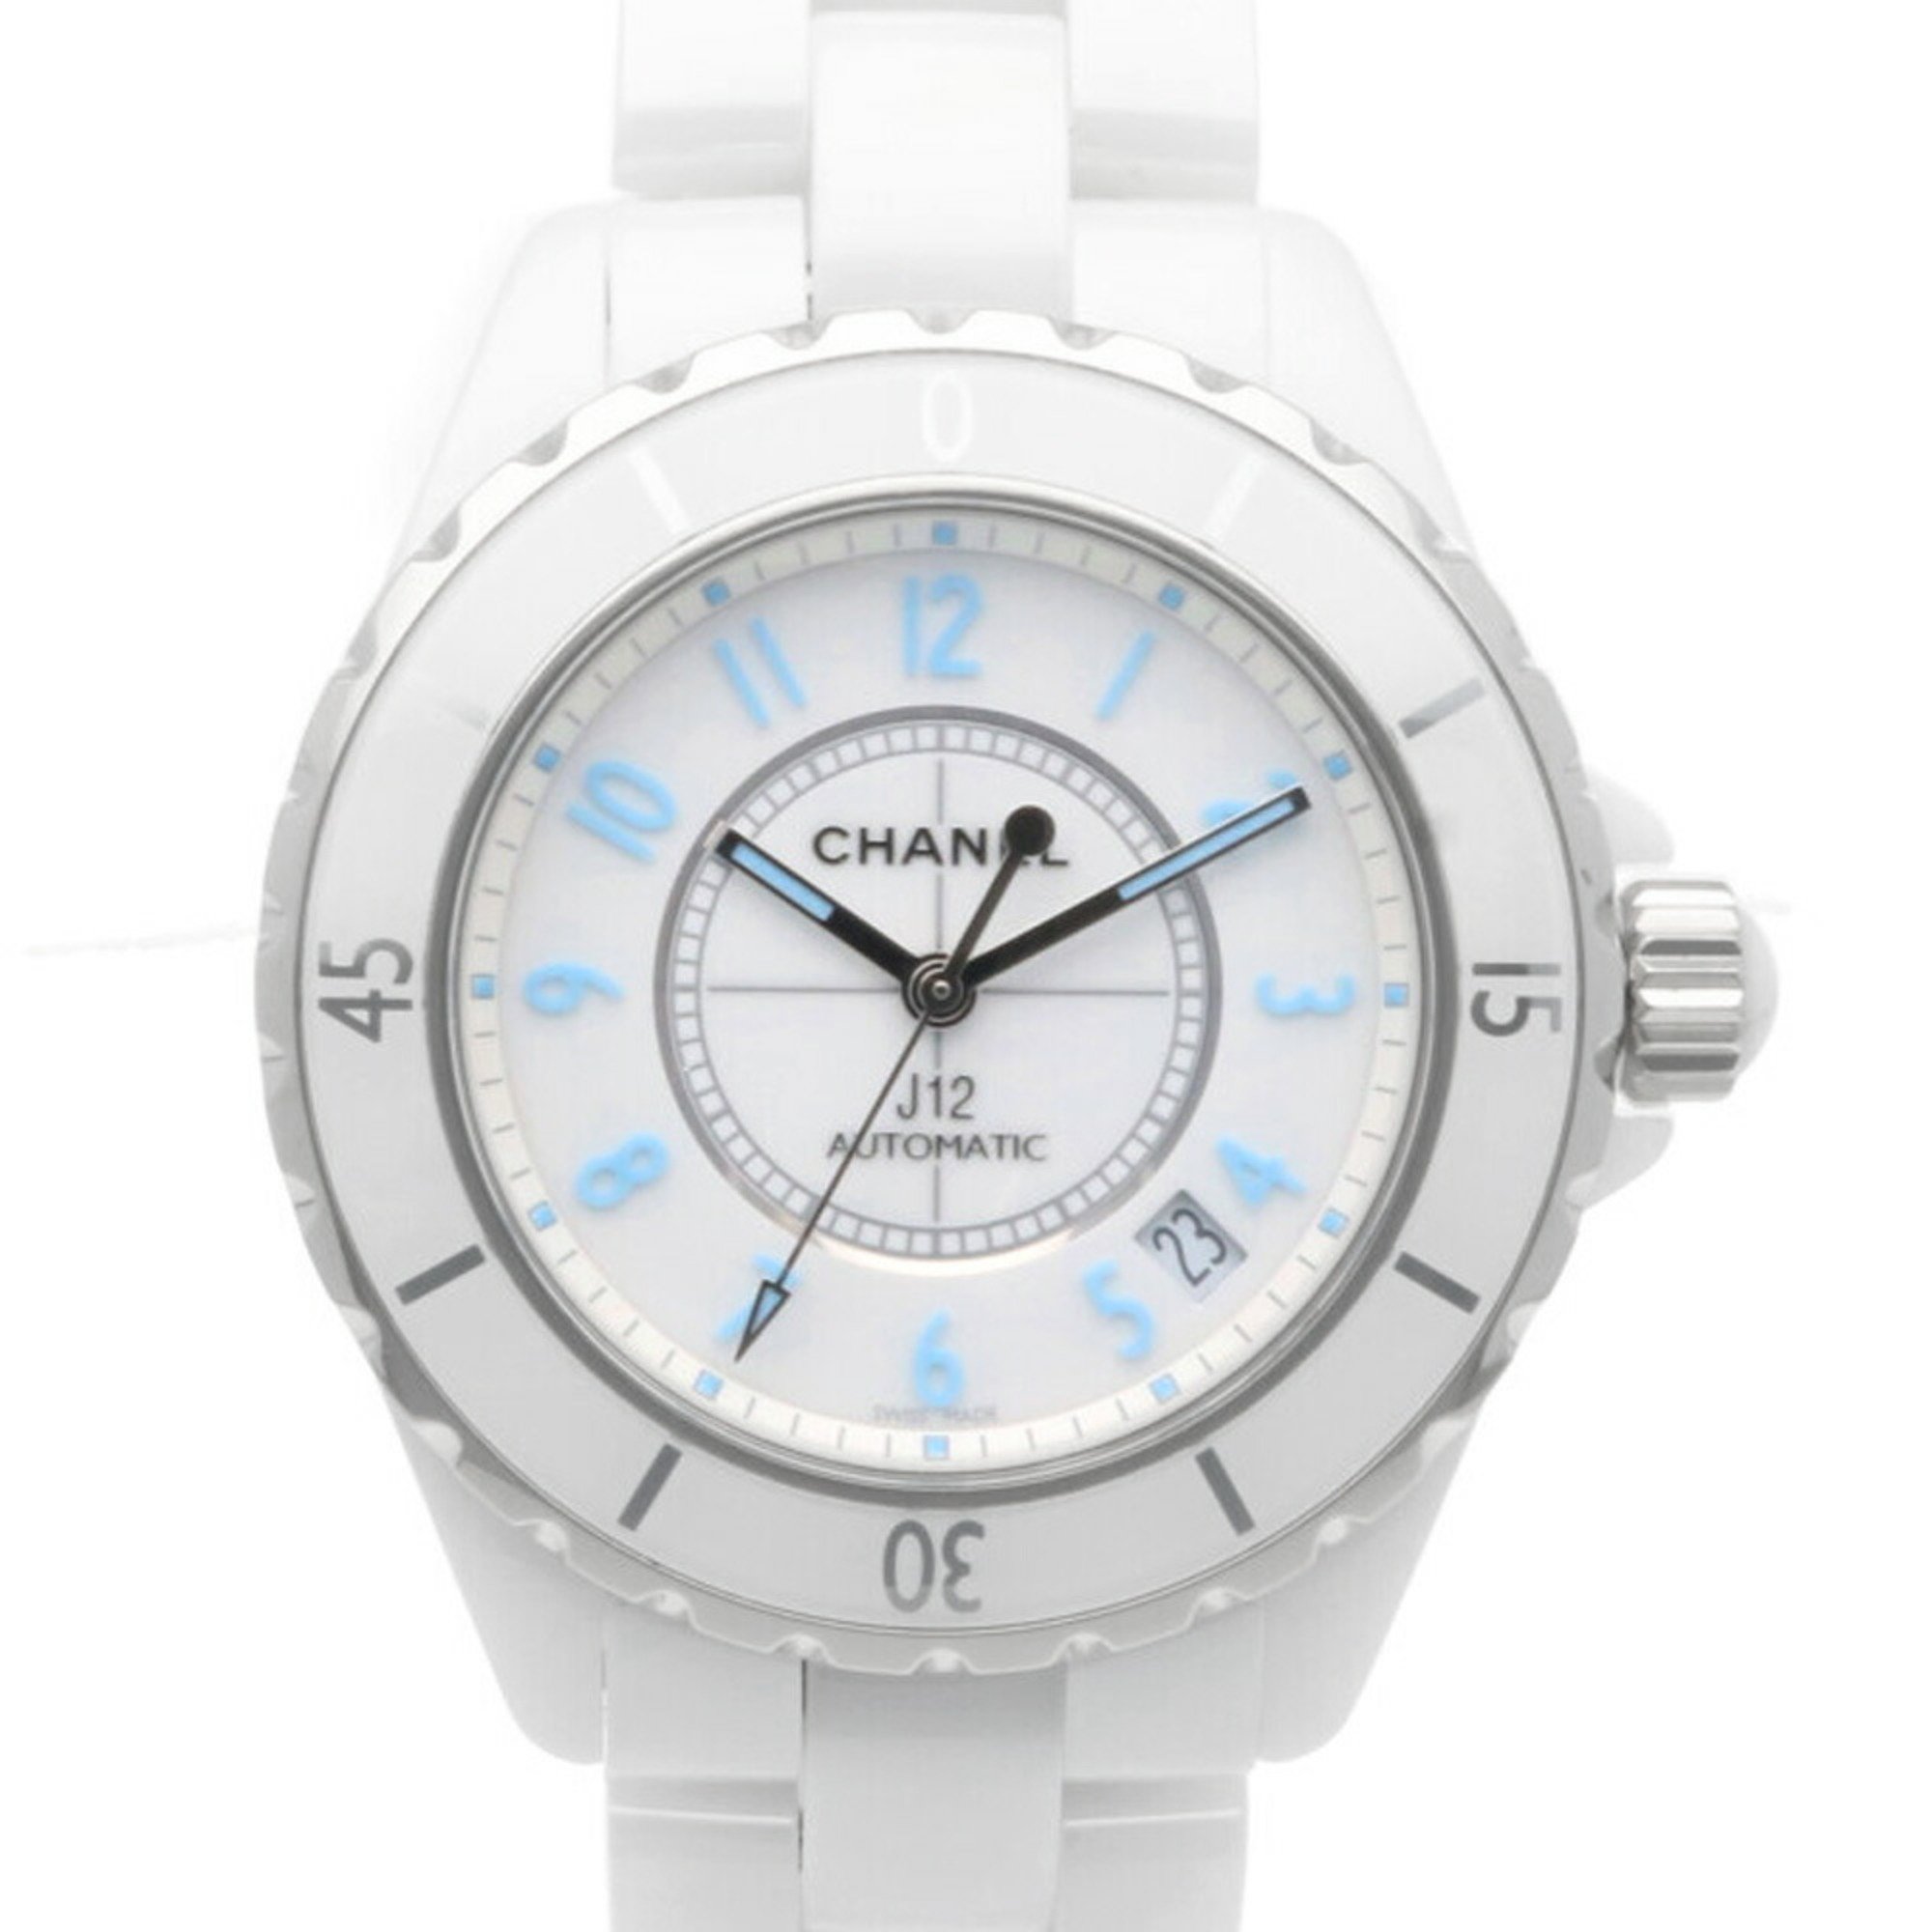 Chanel J12 Blue Light Watch Ceramic H3827 Automatic Men's CHANEL World Limited Edition 2000